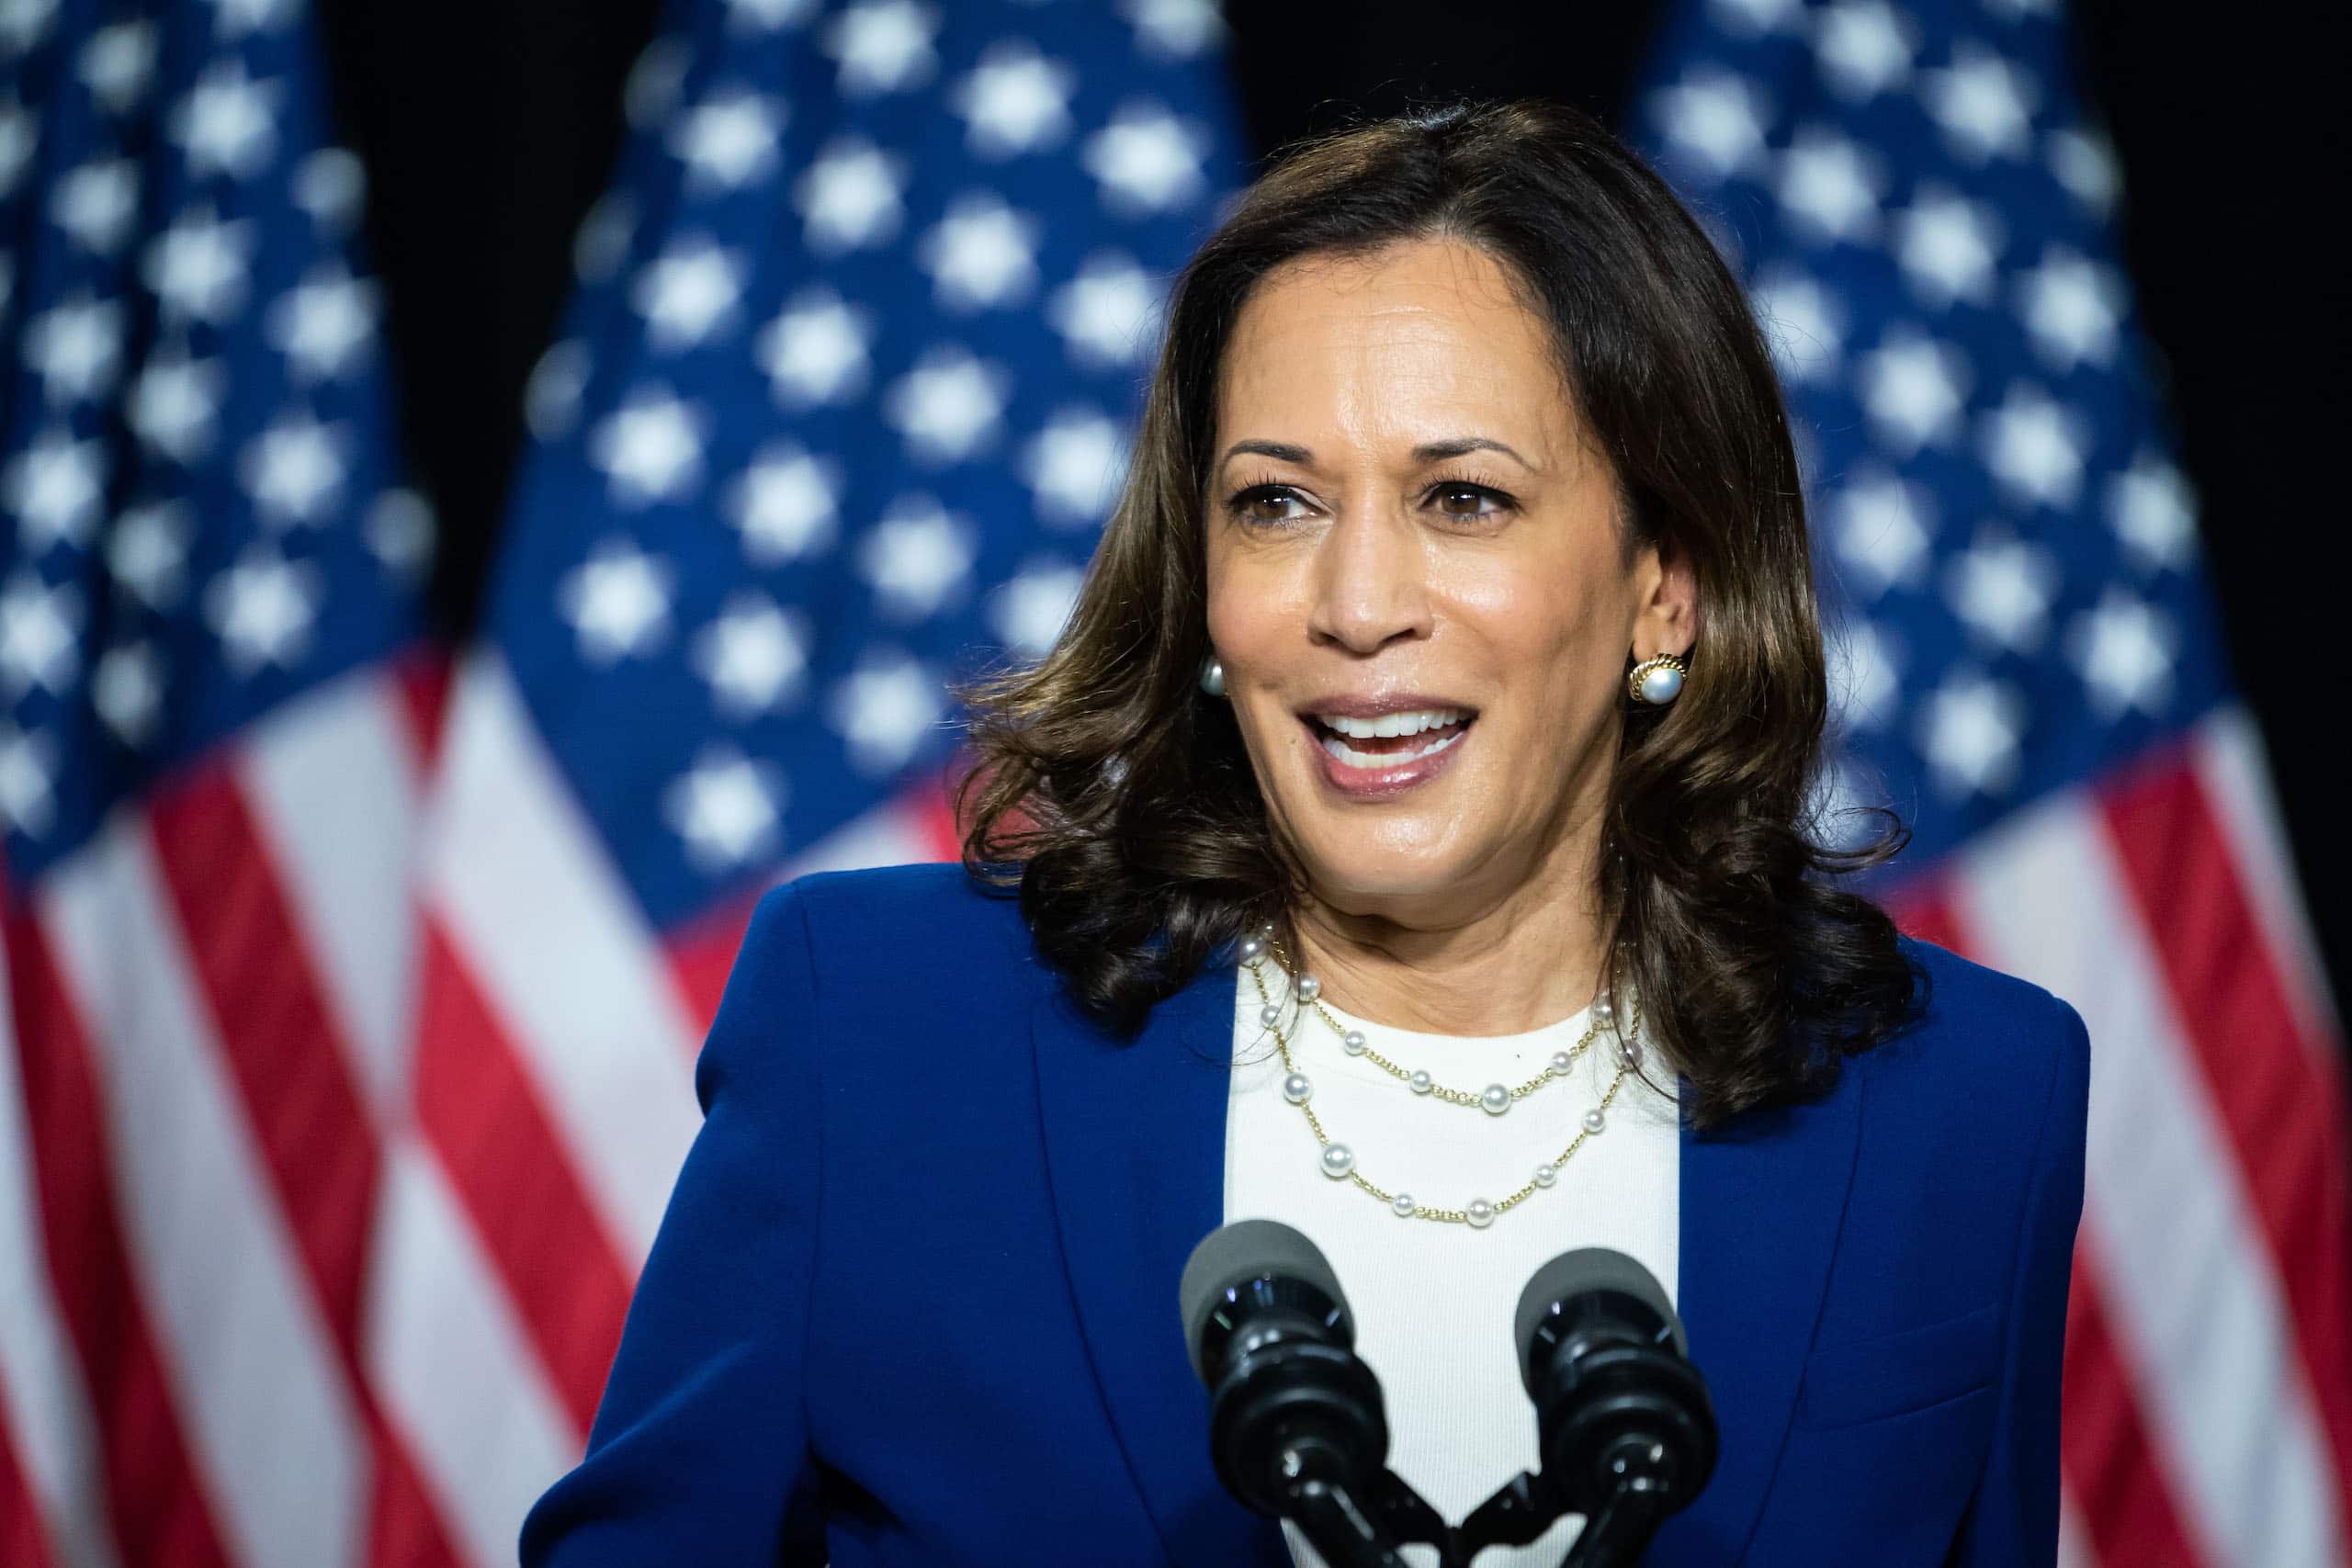 Kamala Harris makes US history, first black woman elected into office as Vice President